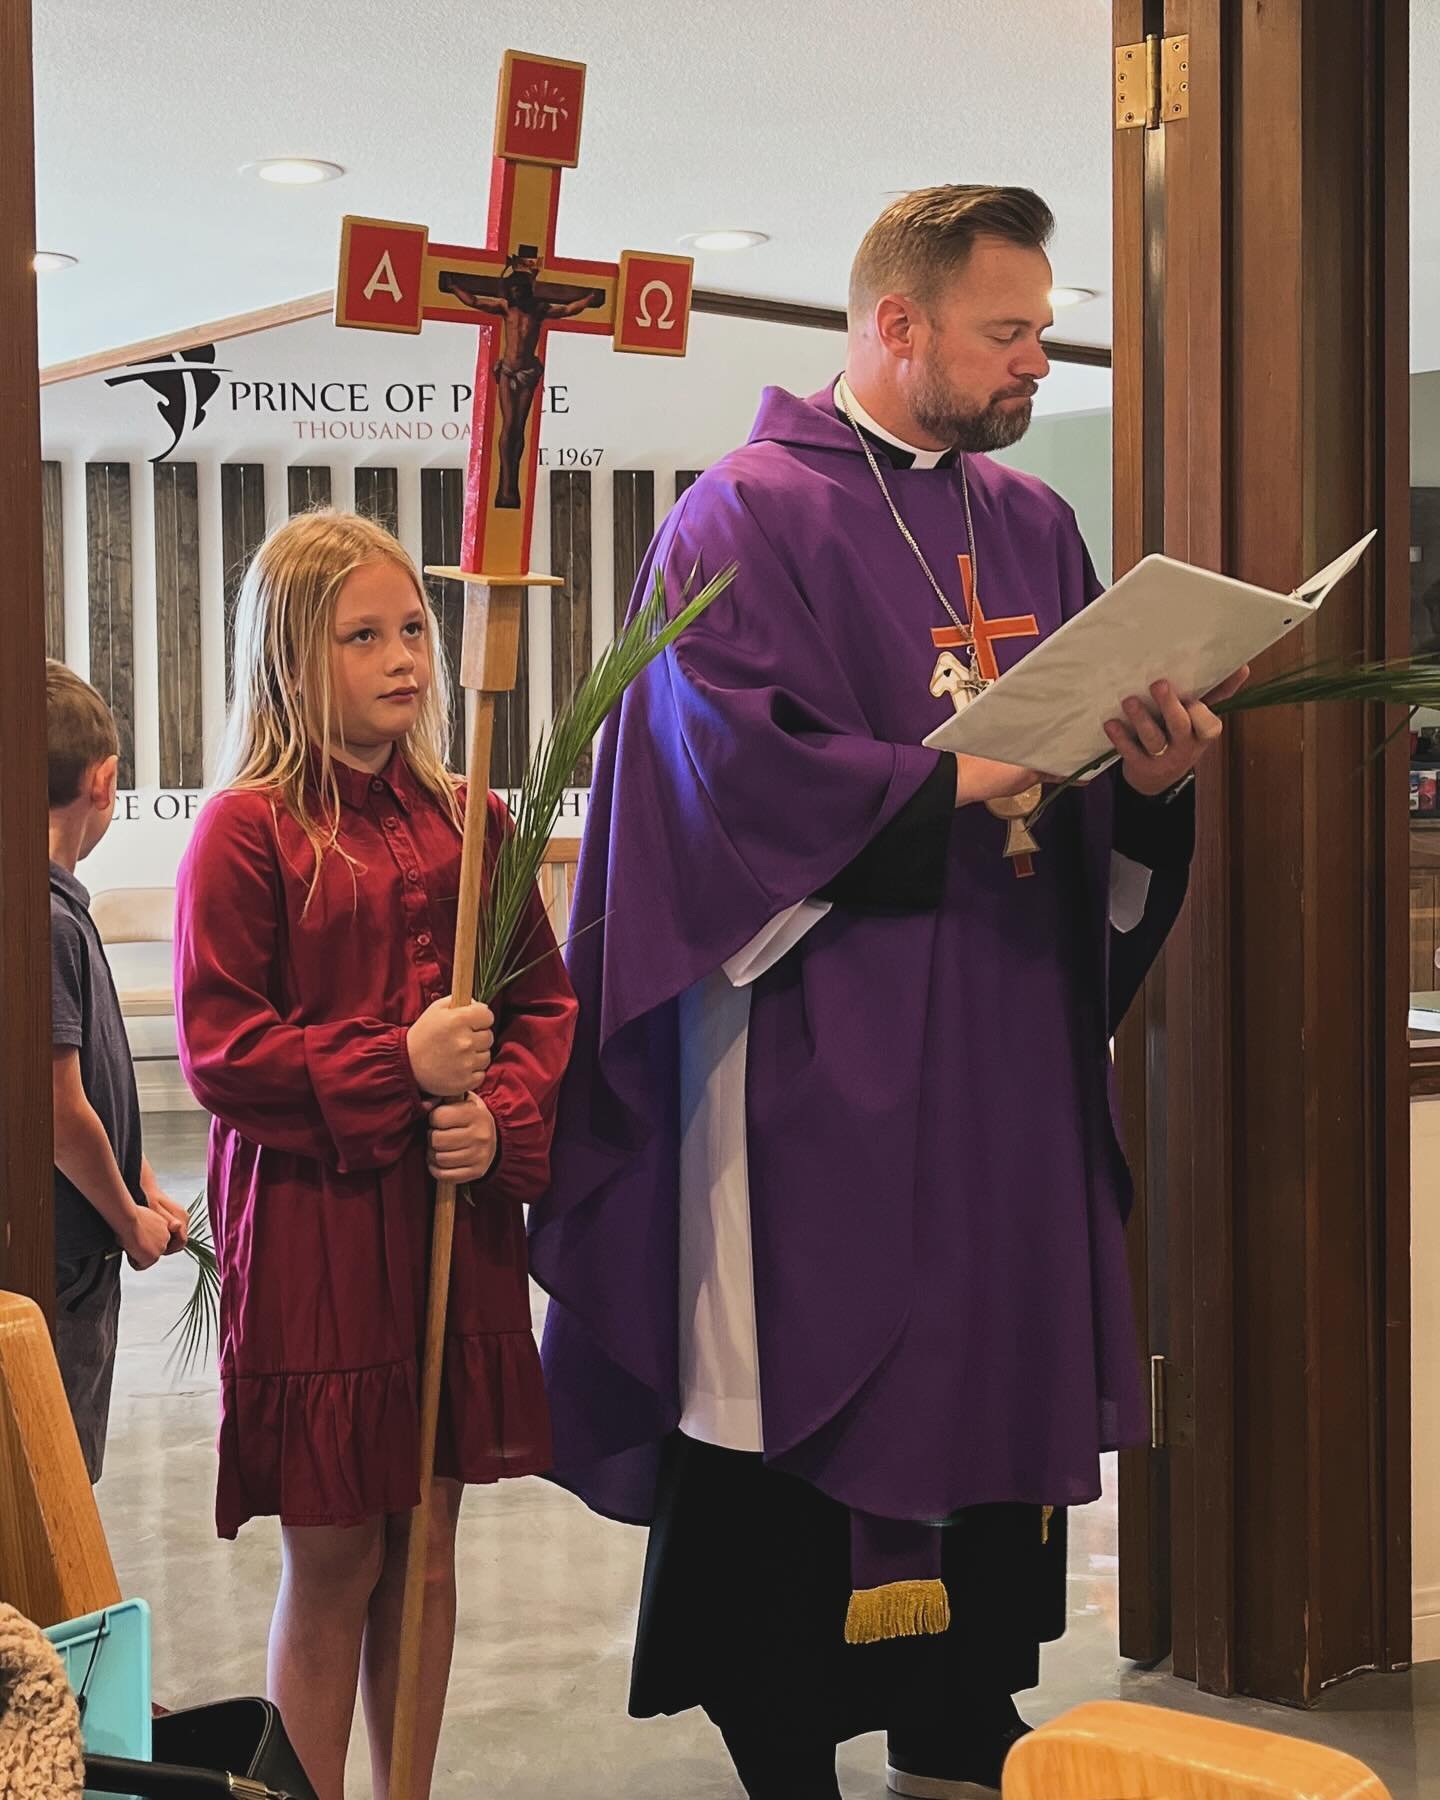 Thank you to all our children who participated in our palm processional on Sunday! What a beautiful way to start Holy Week! We look forward to seeing everyone later this week.